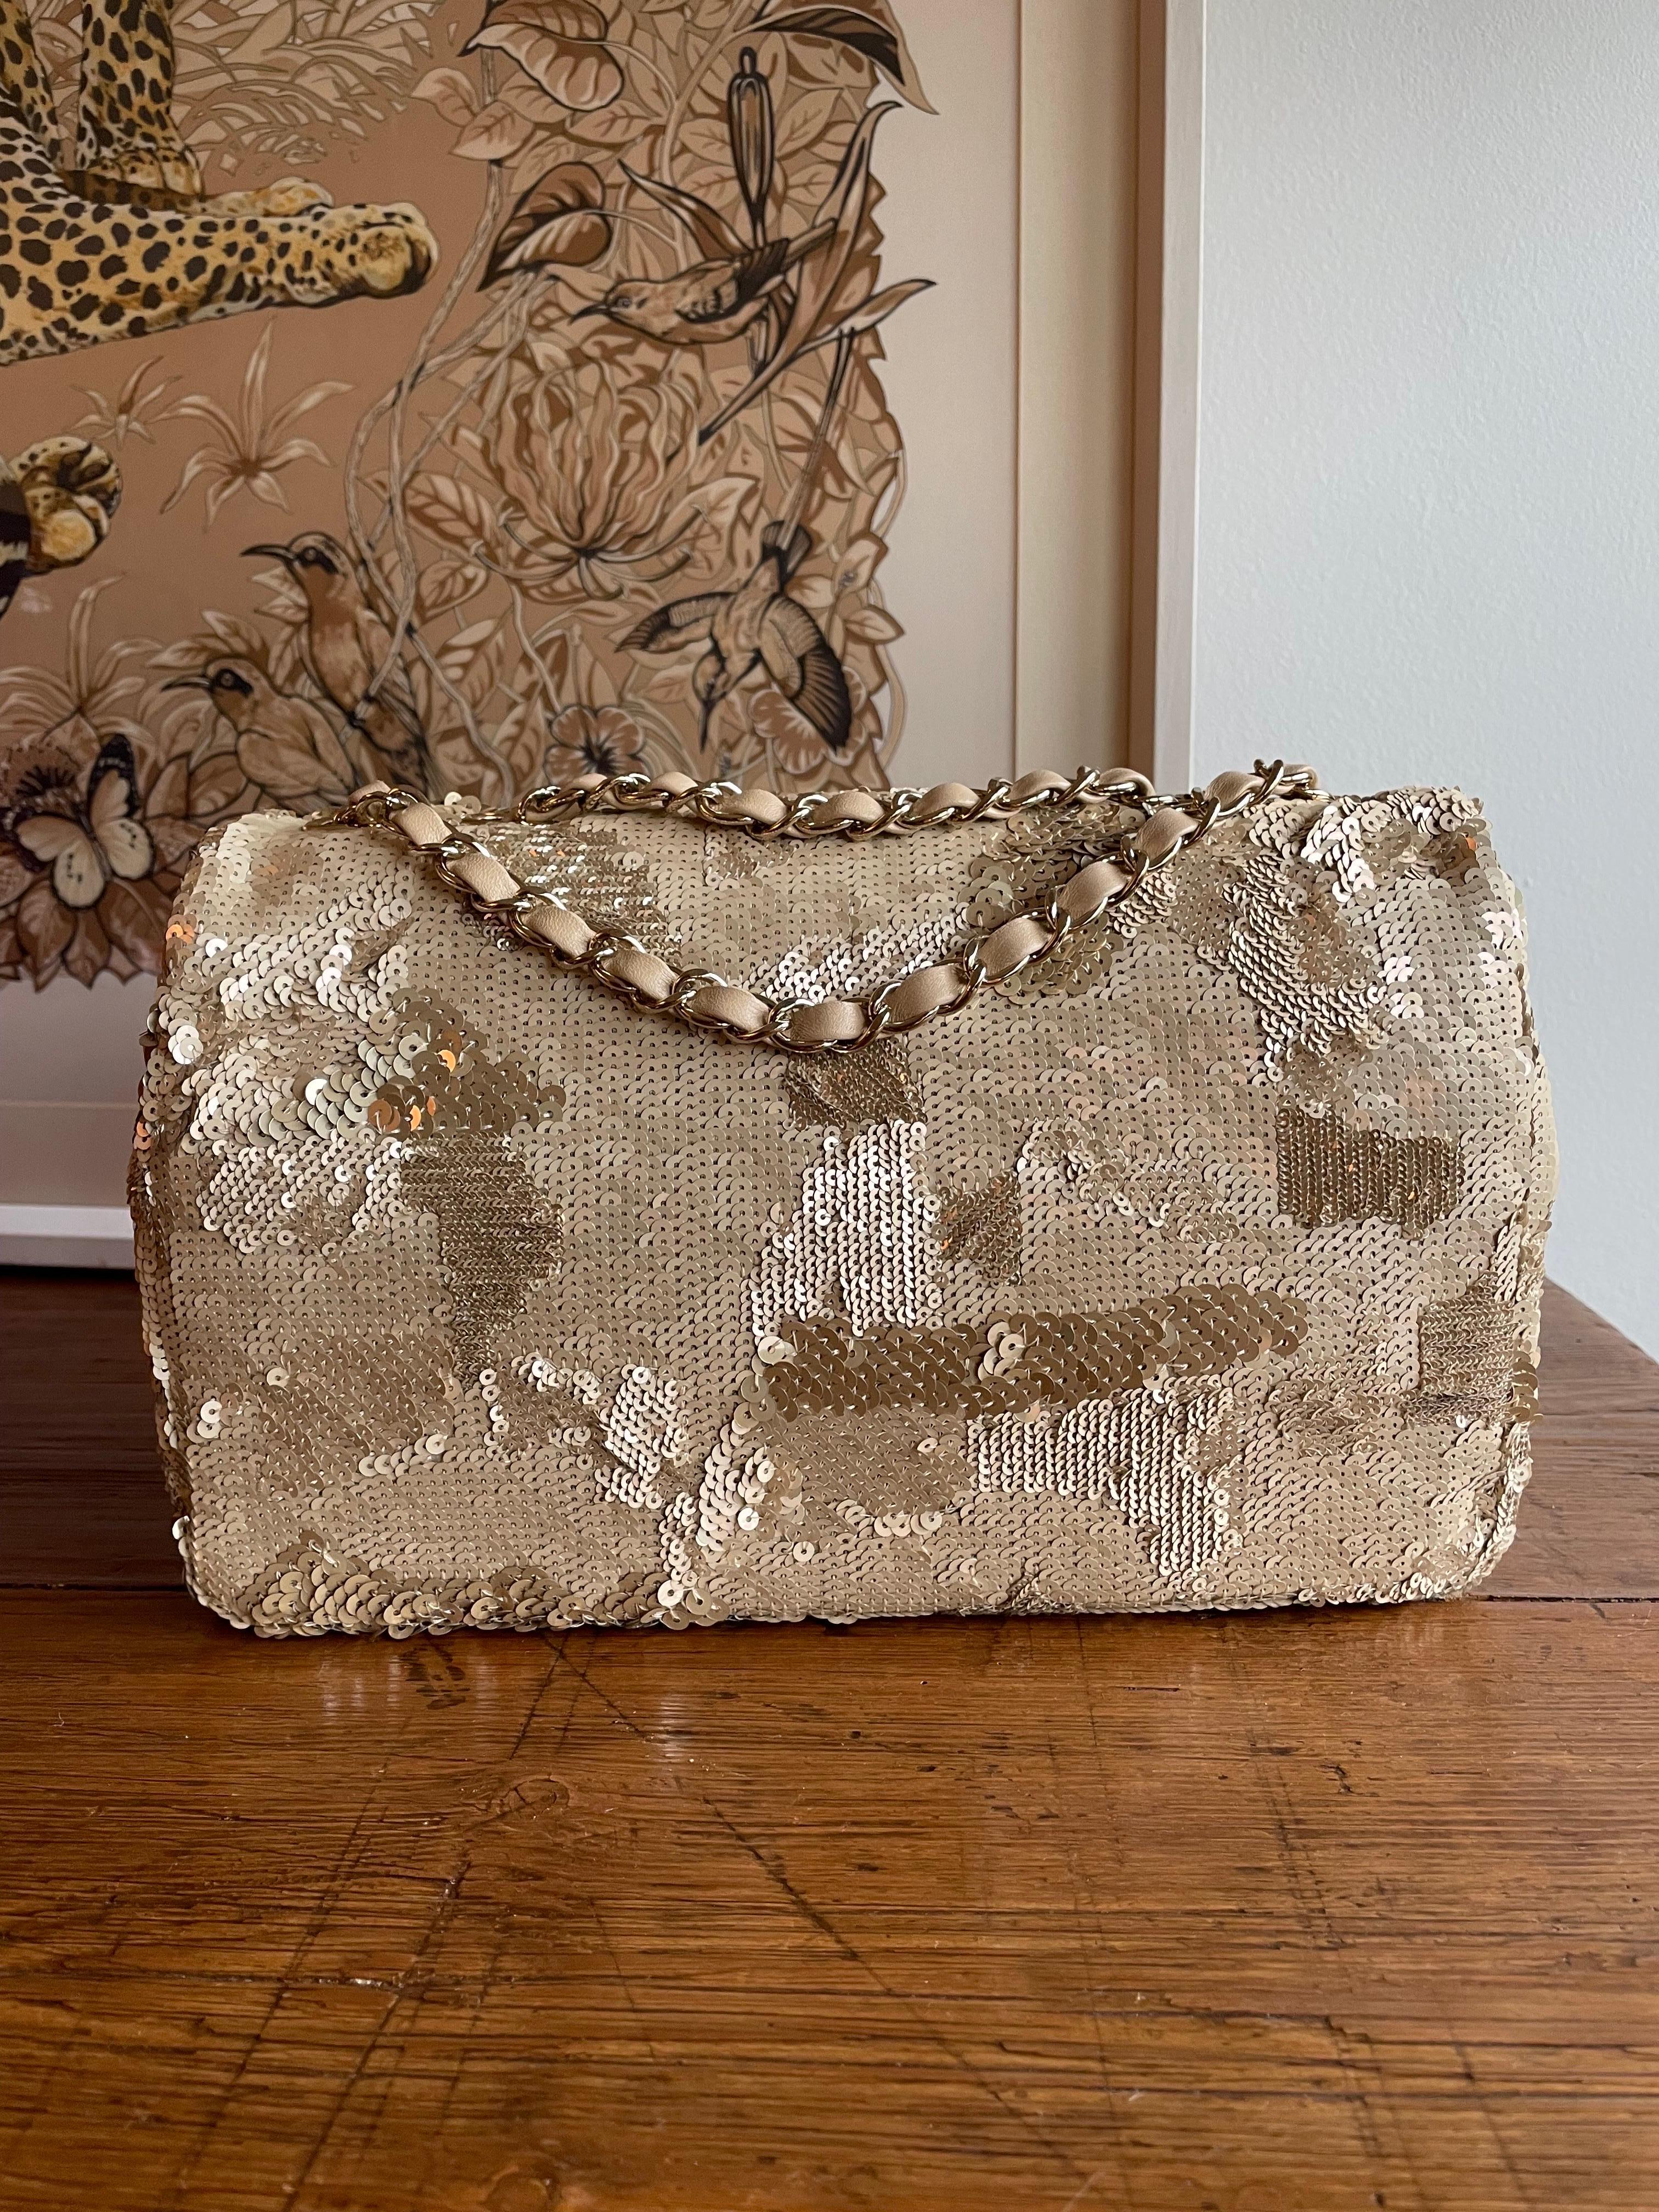 Chanel 2.55 Timeless bag with sequins. 1